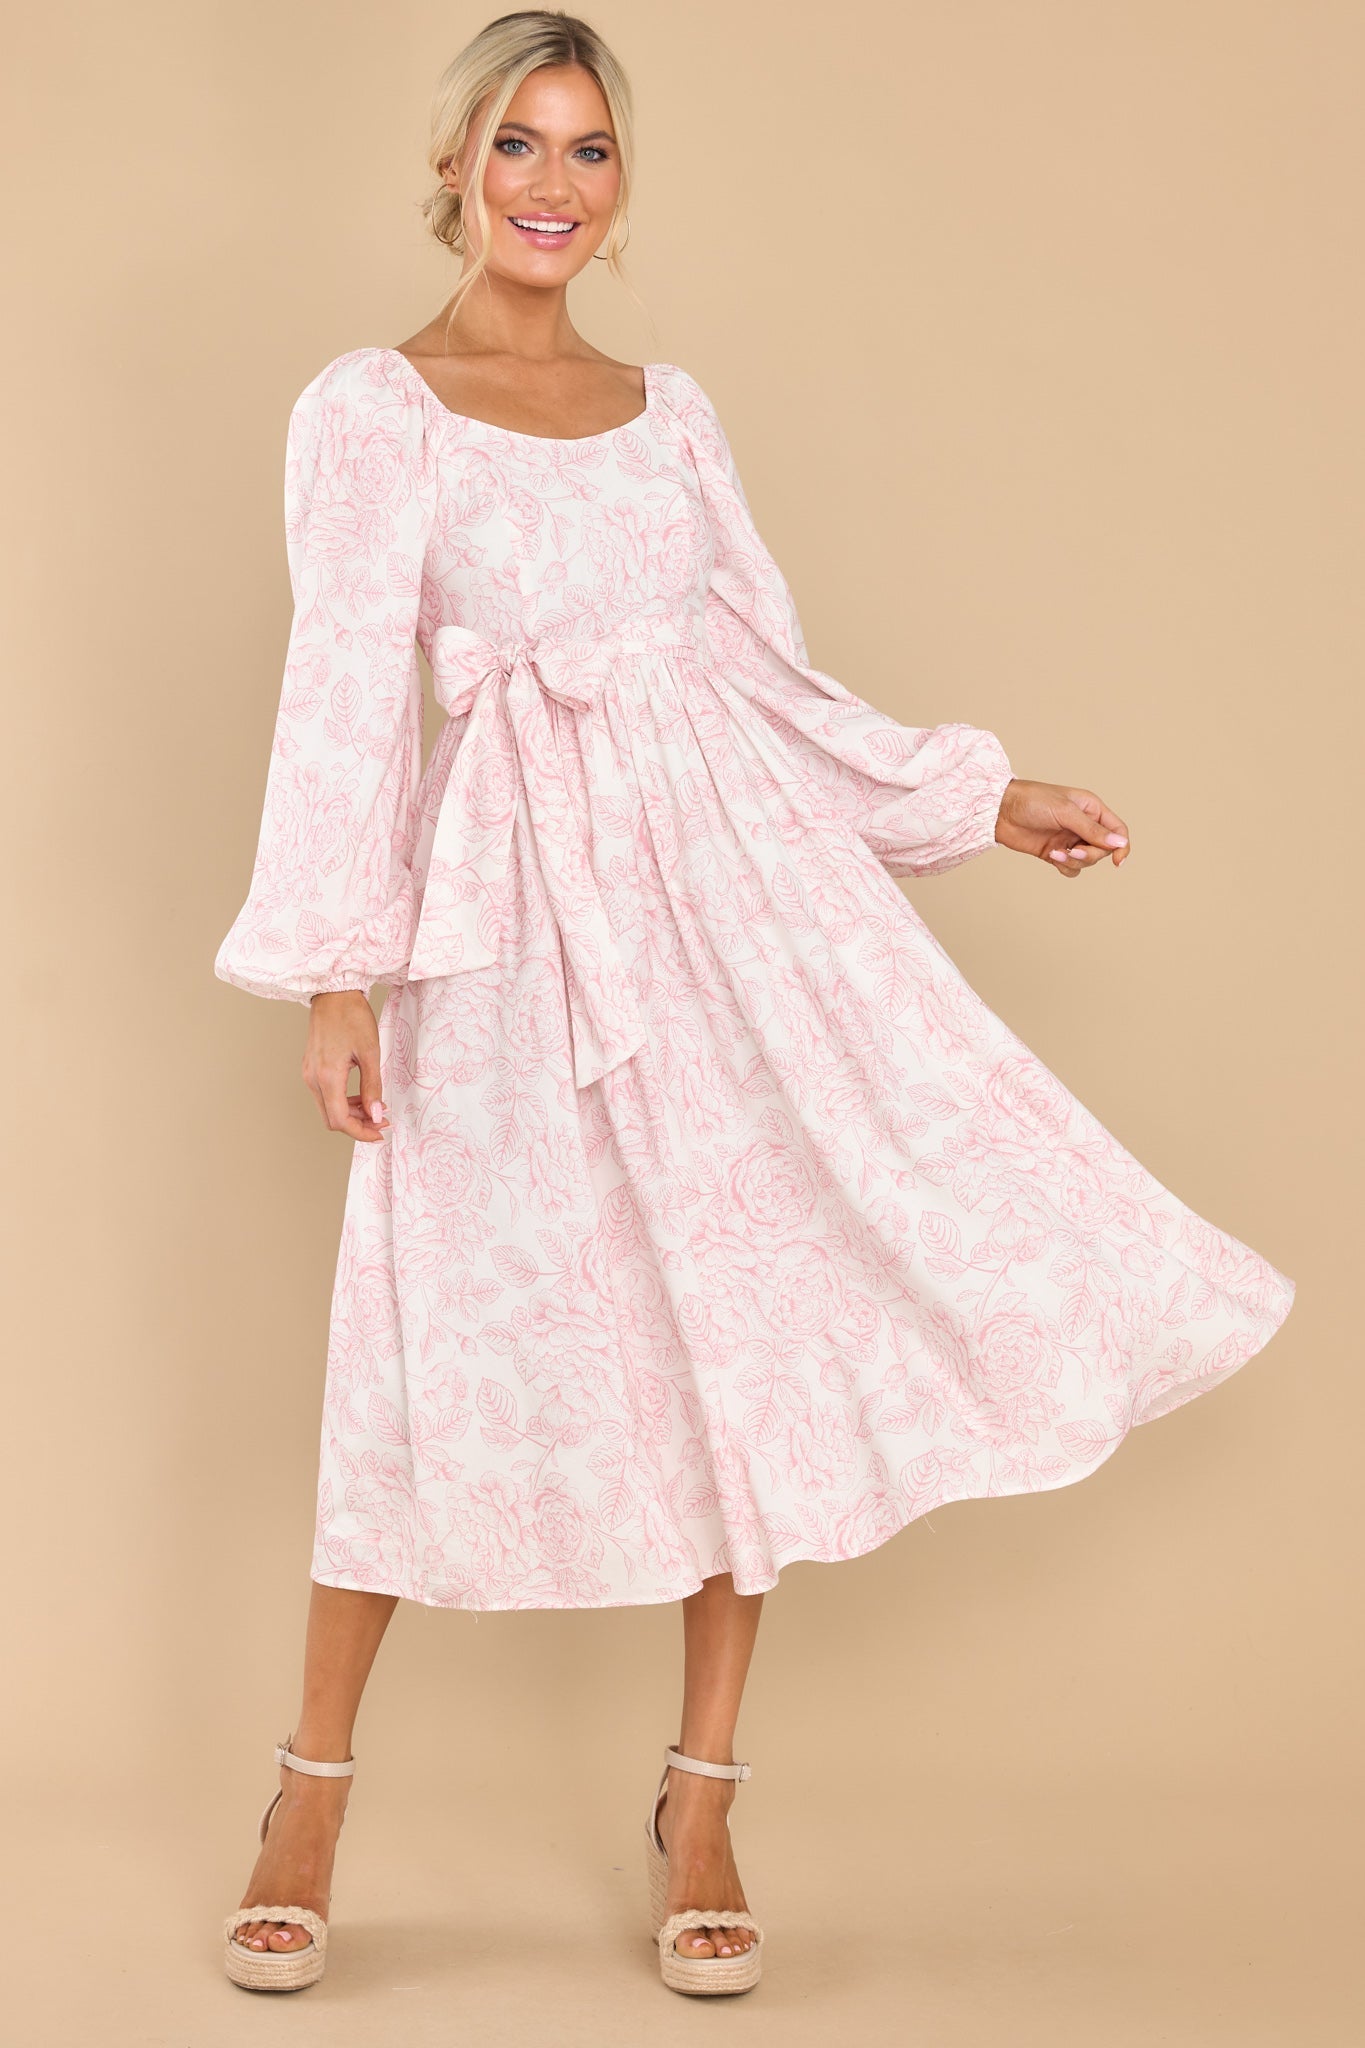 Feels Like Home Pink Floral Maxi Dress - Red Dress